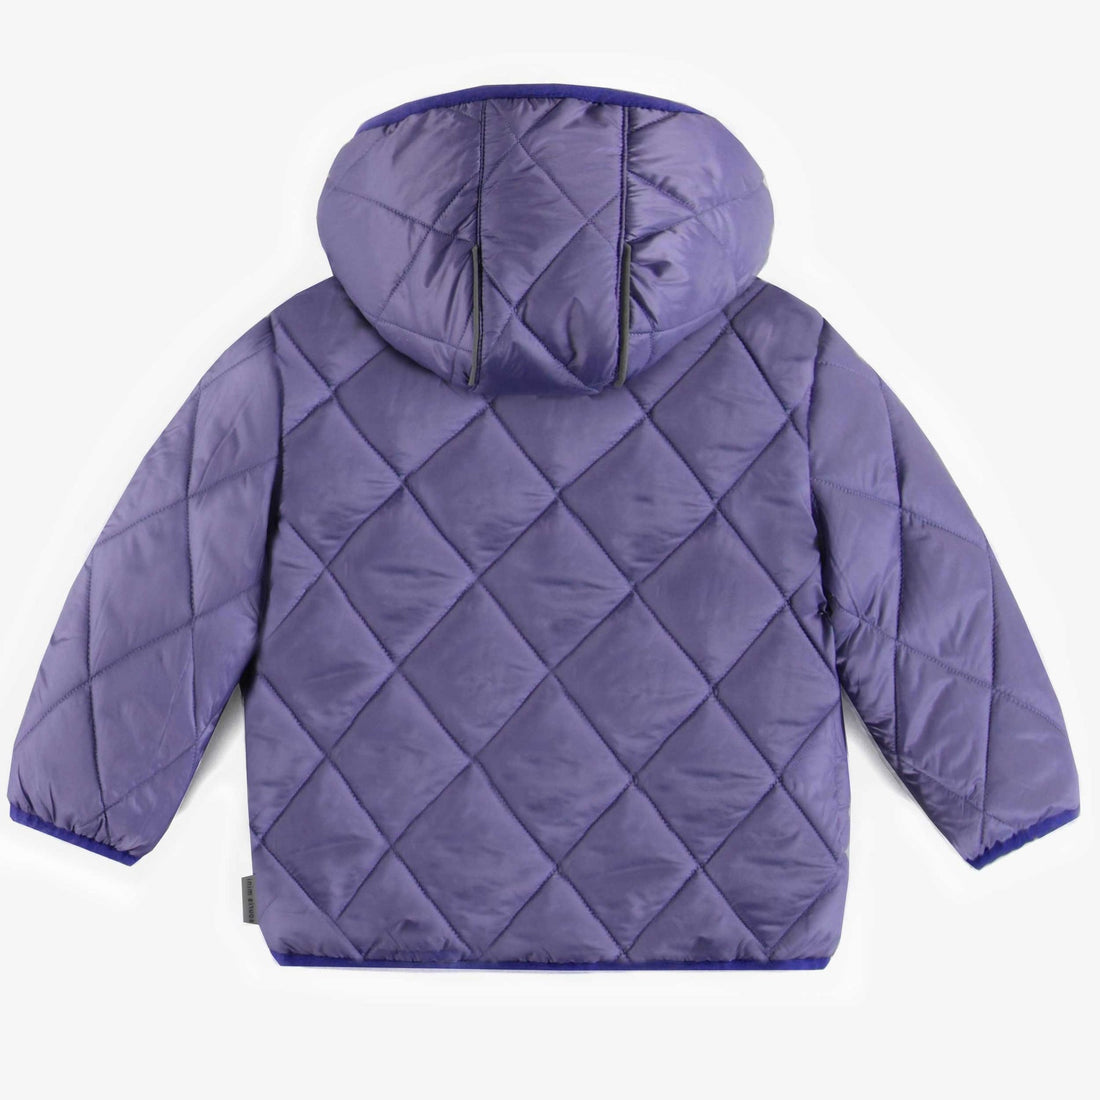 PURPLE QUILTED PUFFER COAT, BABY